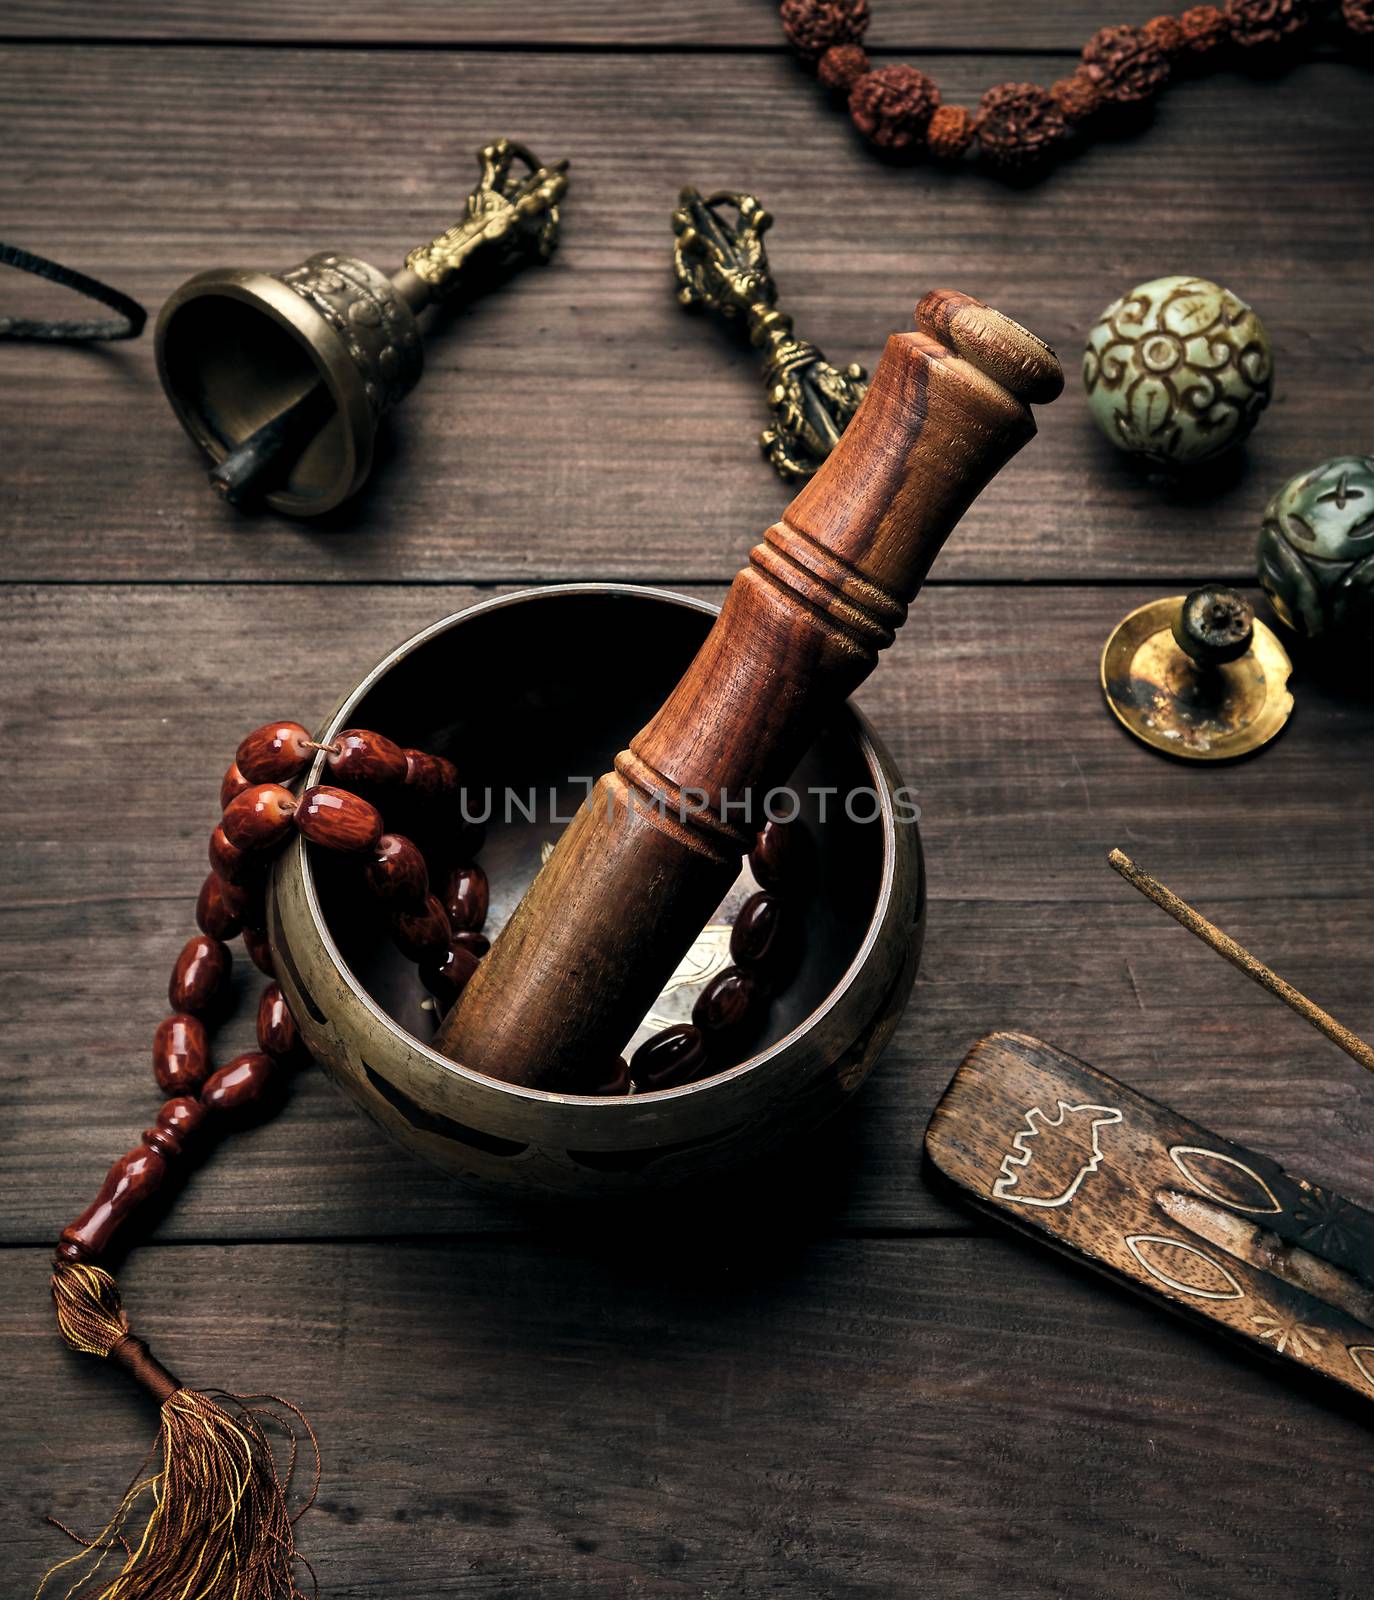 copper singing bowl and a wooden stick on a brown table by ndanko